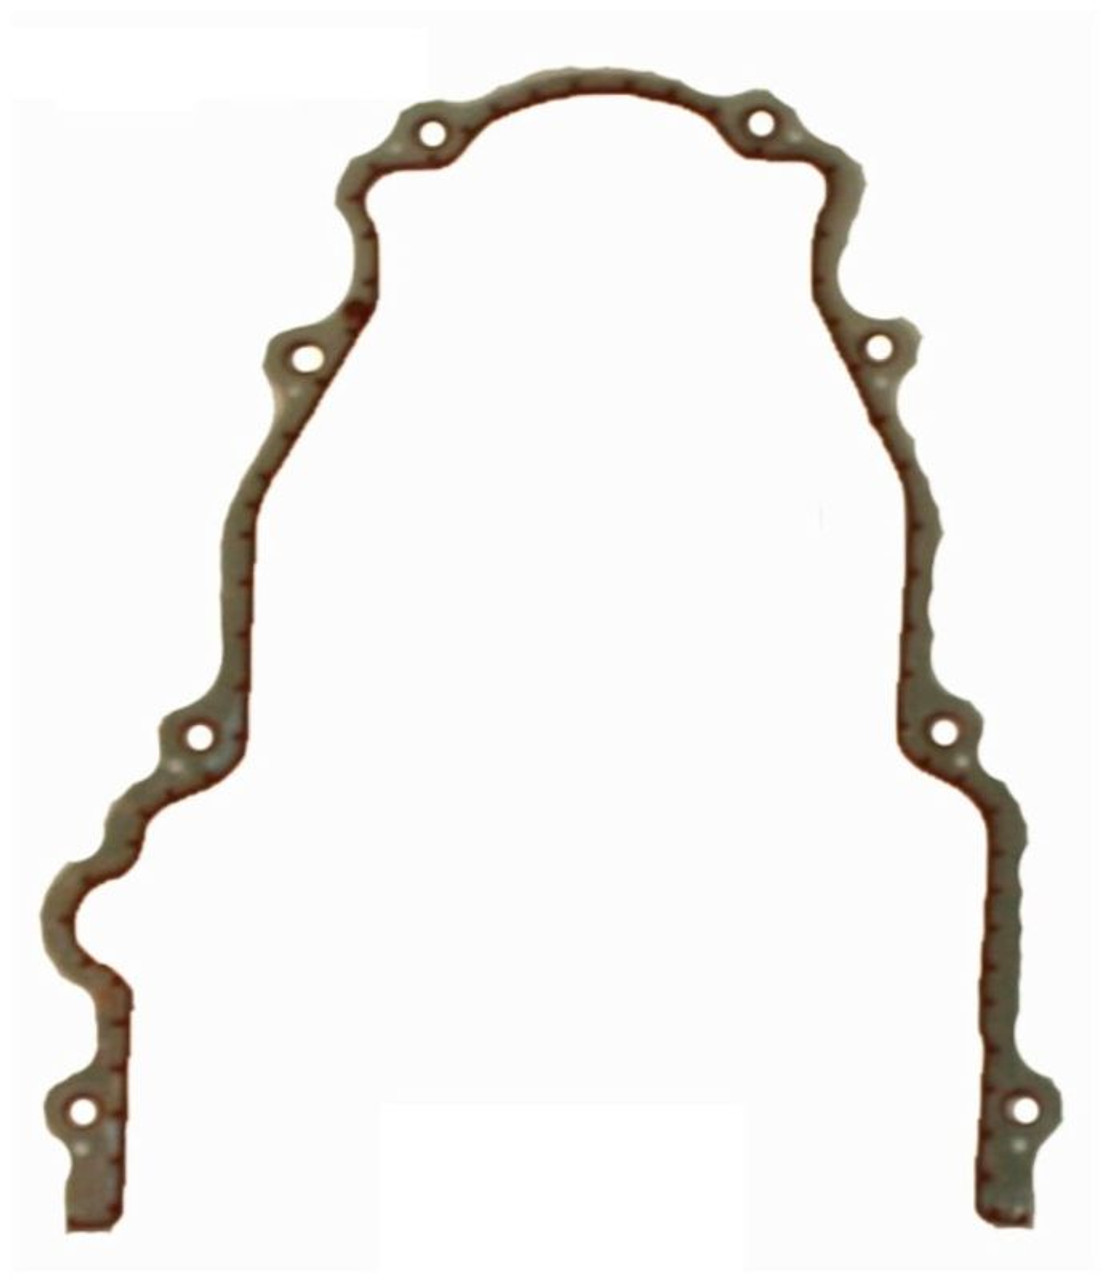 2006 Chevrolet SSR 6.0L Engine Timing Cover Gasket TCG293-A -339